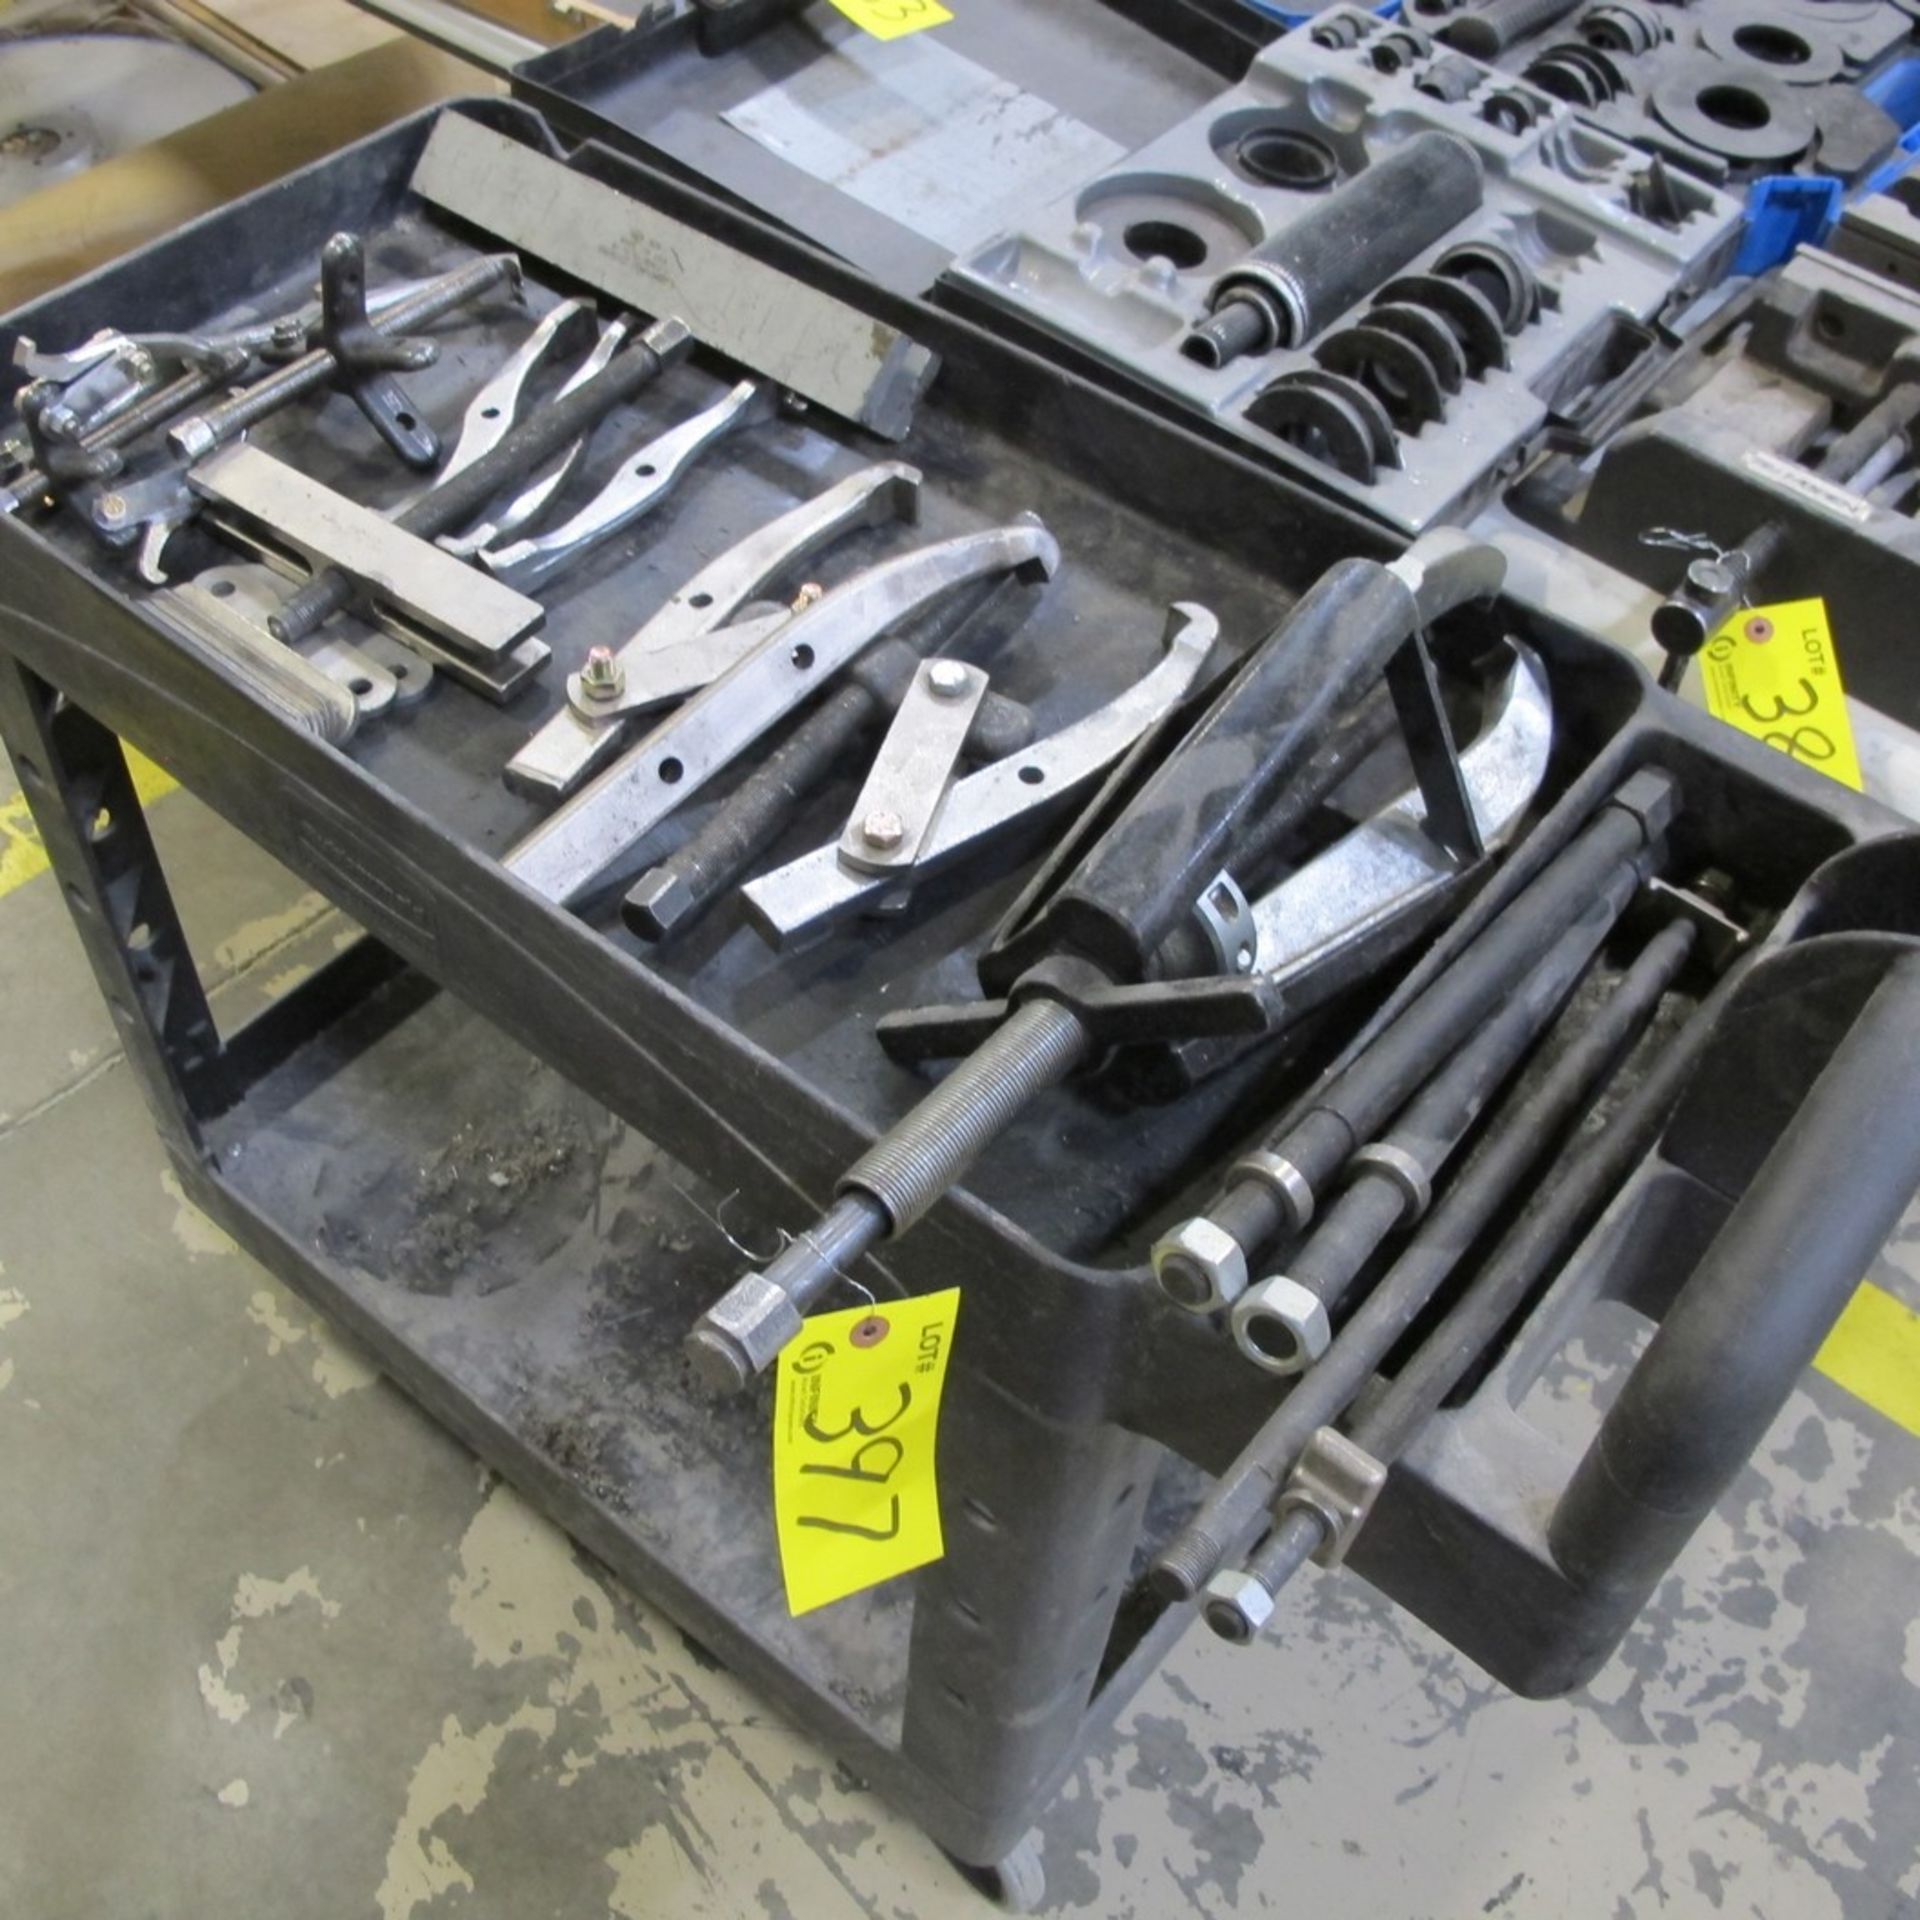 SHOP CART W/ PULLERS AND COMPONENTS (MACHINE SHOP)